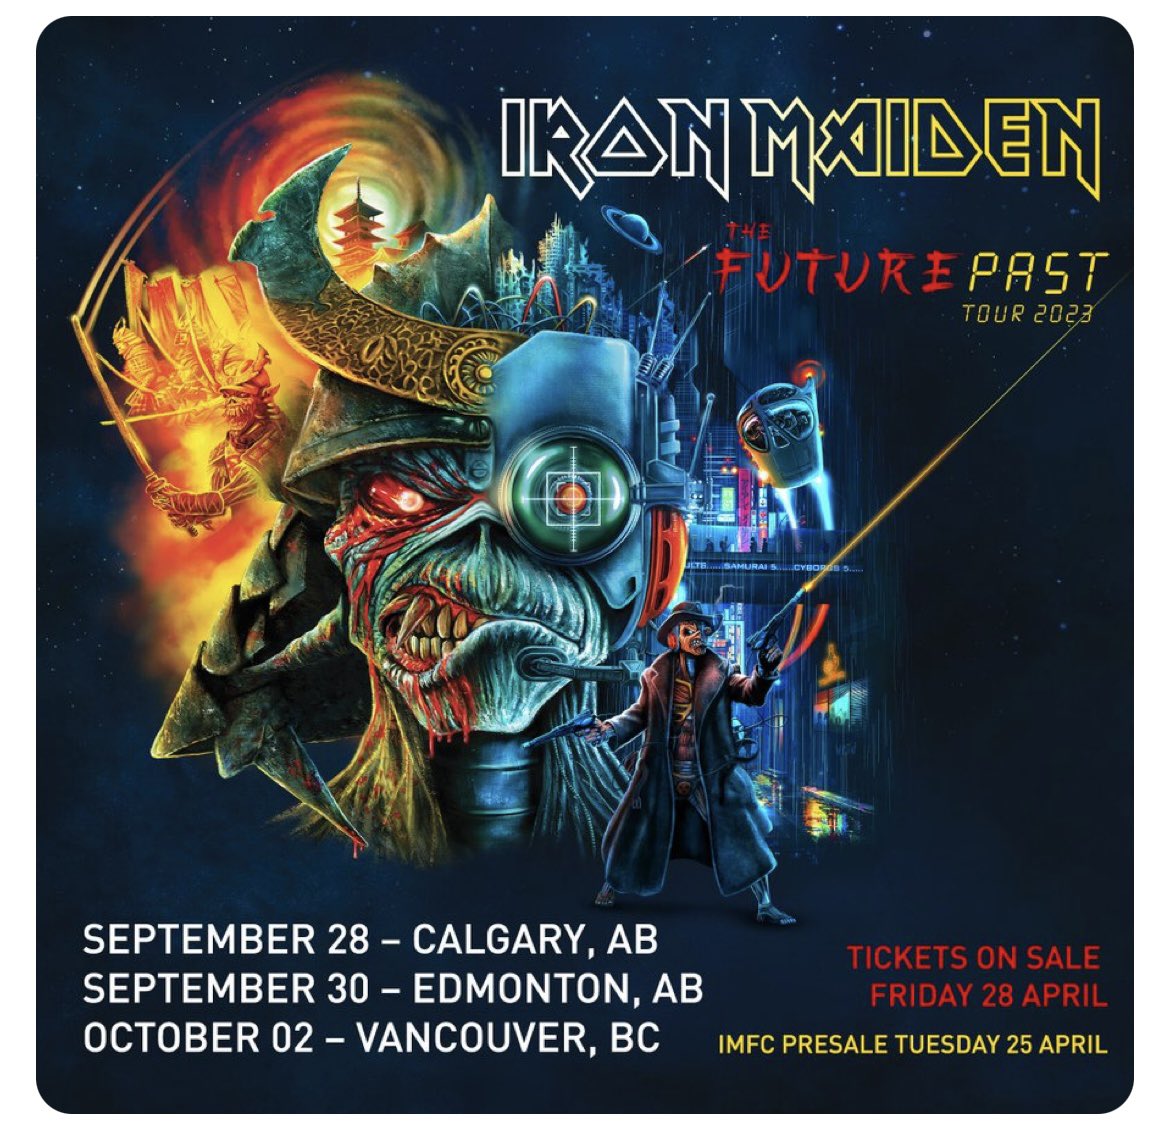 Maiden? October? Vancouver? Fucking right!! Let’s do this!! 🇨🇦🤟🏻🇬🇧 #NewTour #Maiden #UpTheIrons #FuturePast #LeftCoast #Vancouver #BeenALongTime #StanleyPark #Gulp